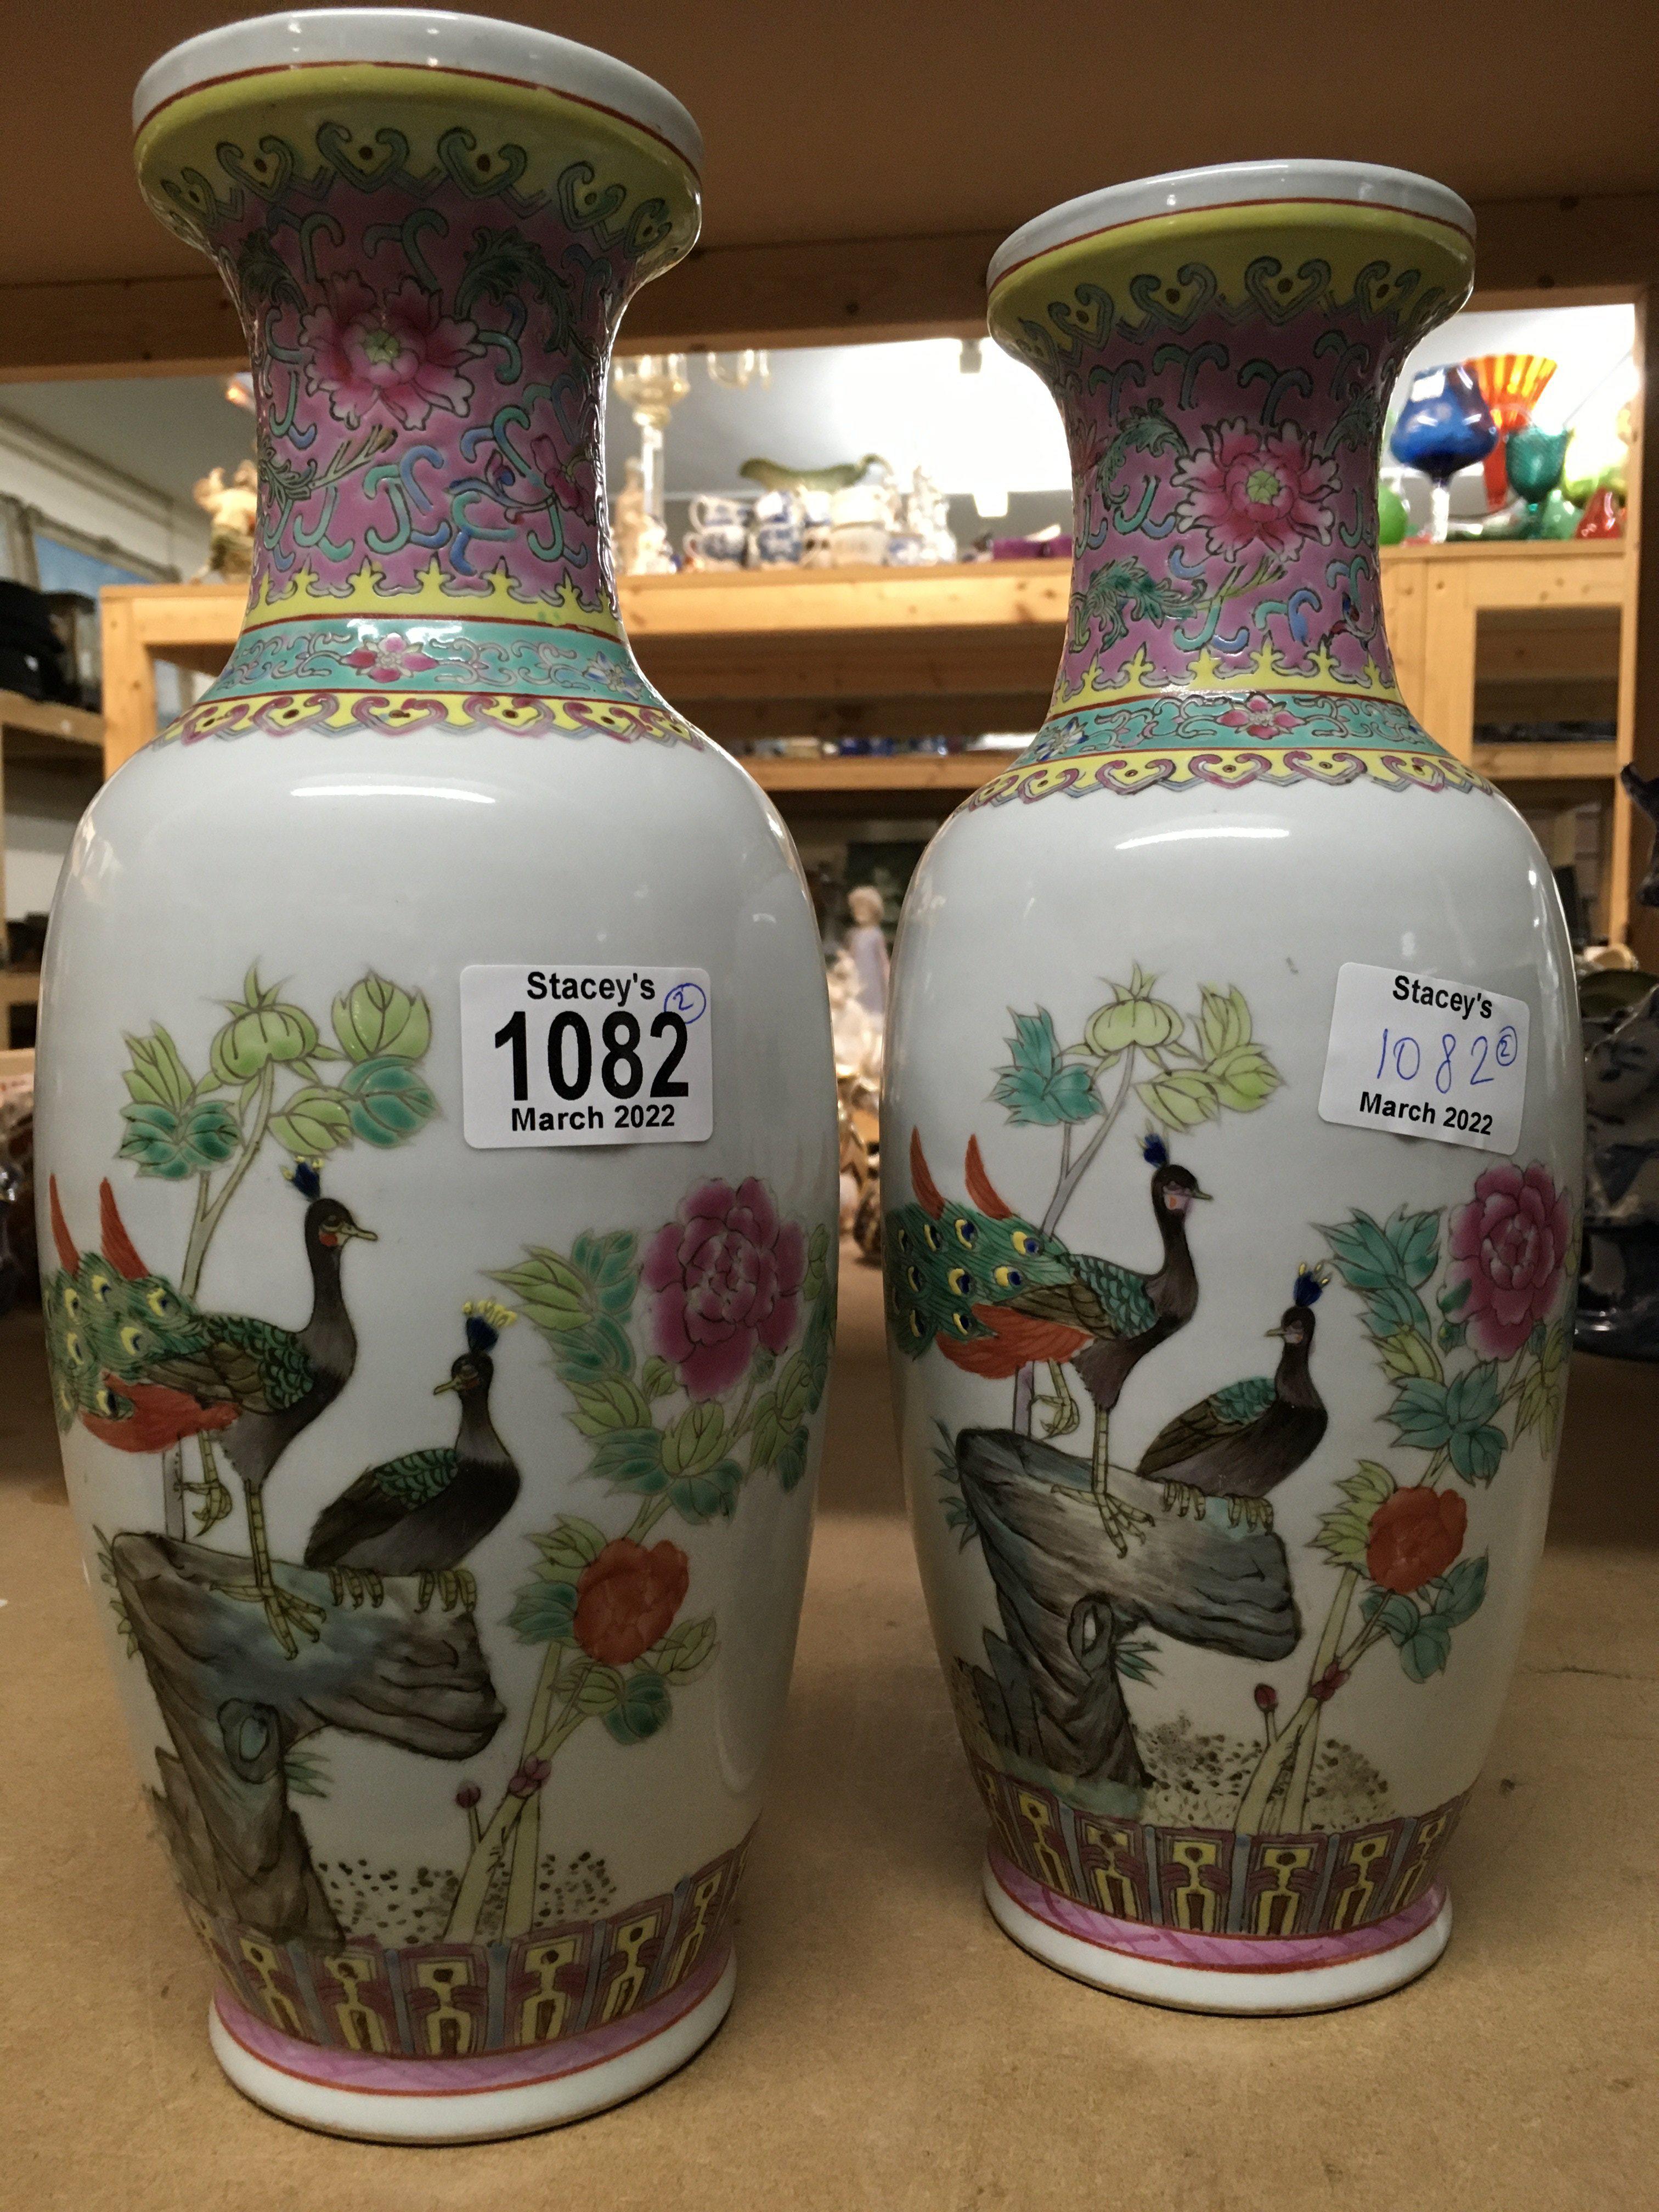 A pair of Chinese Republic vases - NO RESERVE